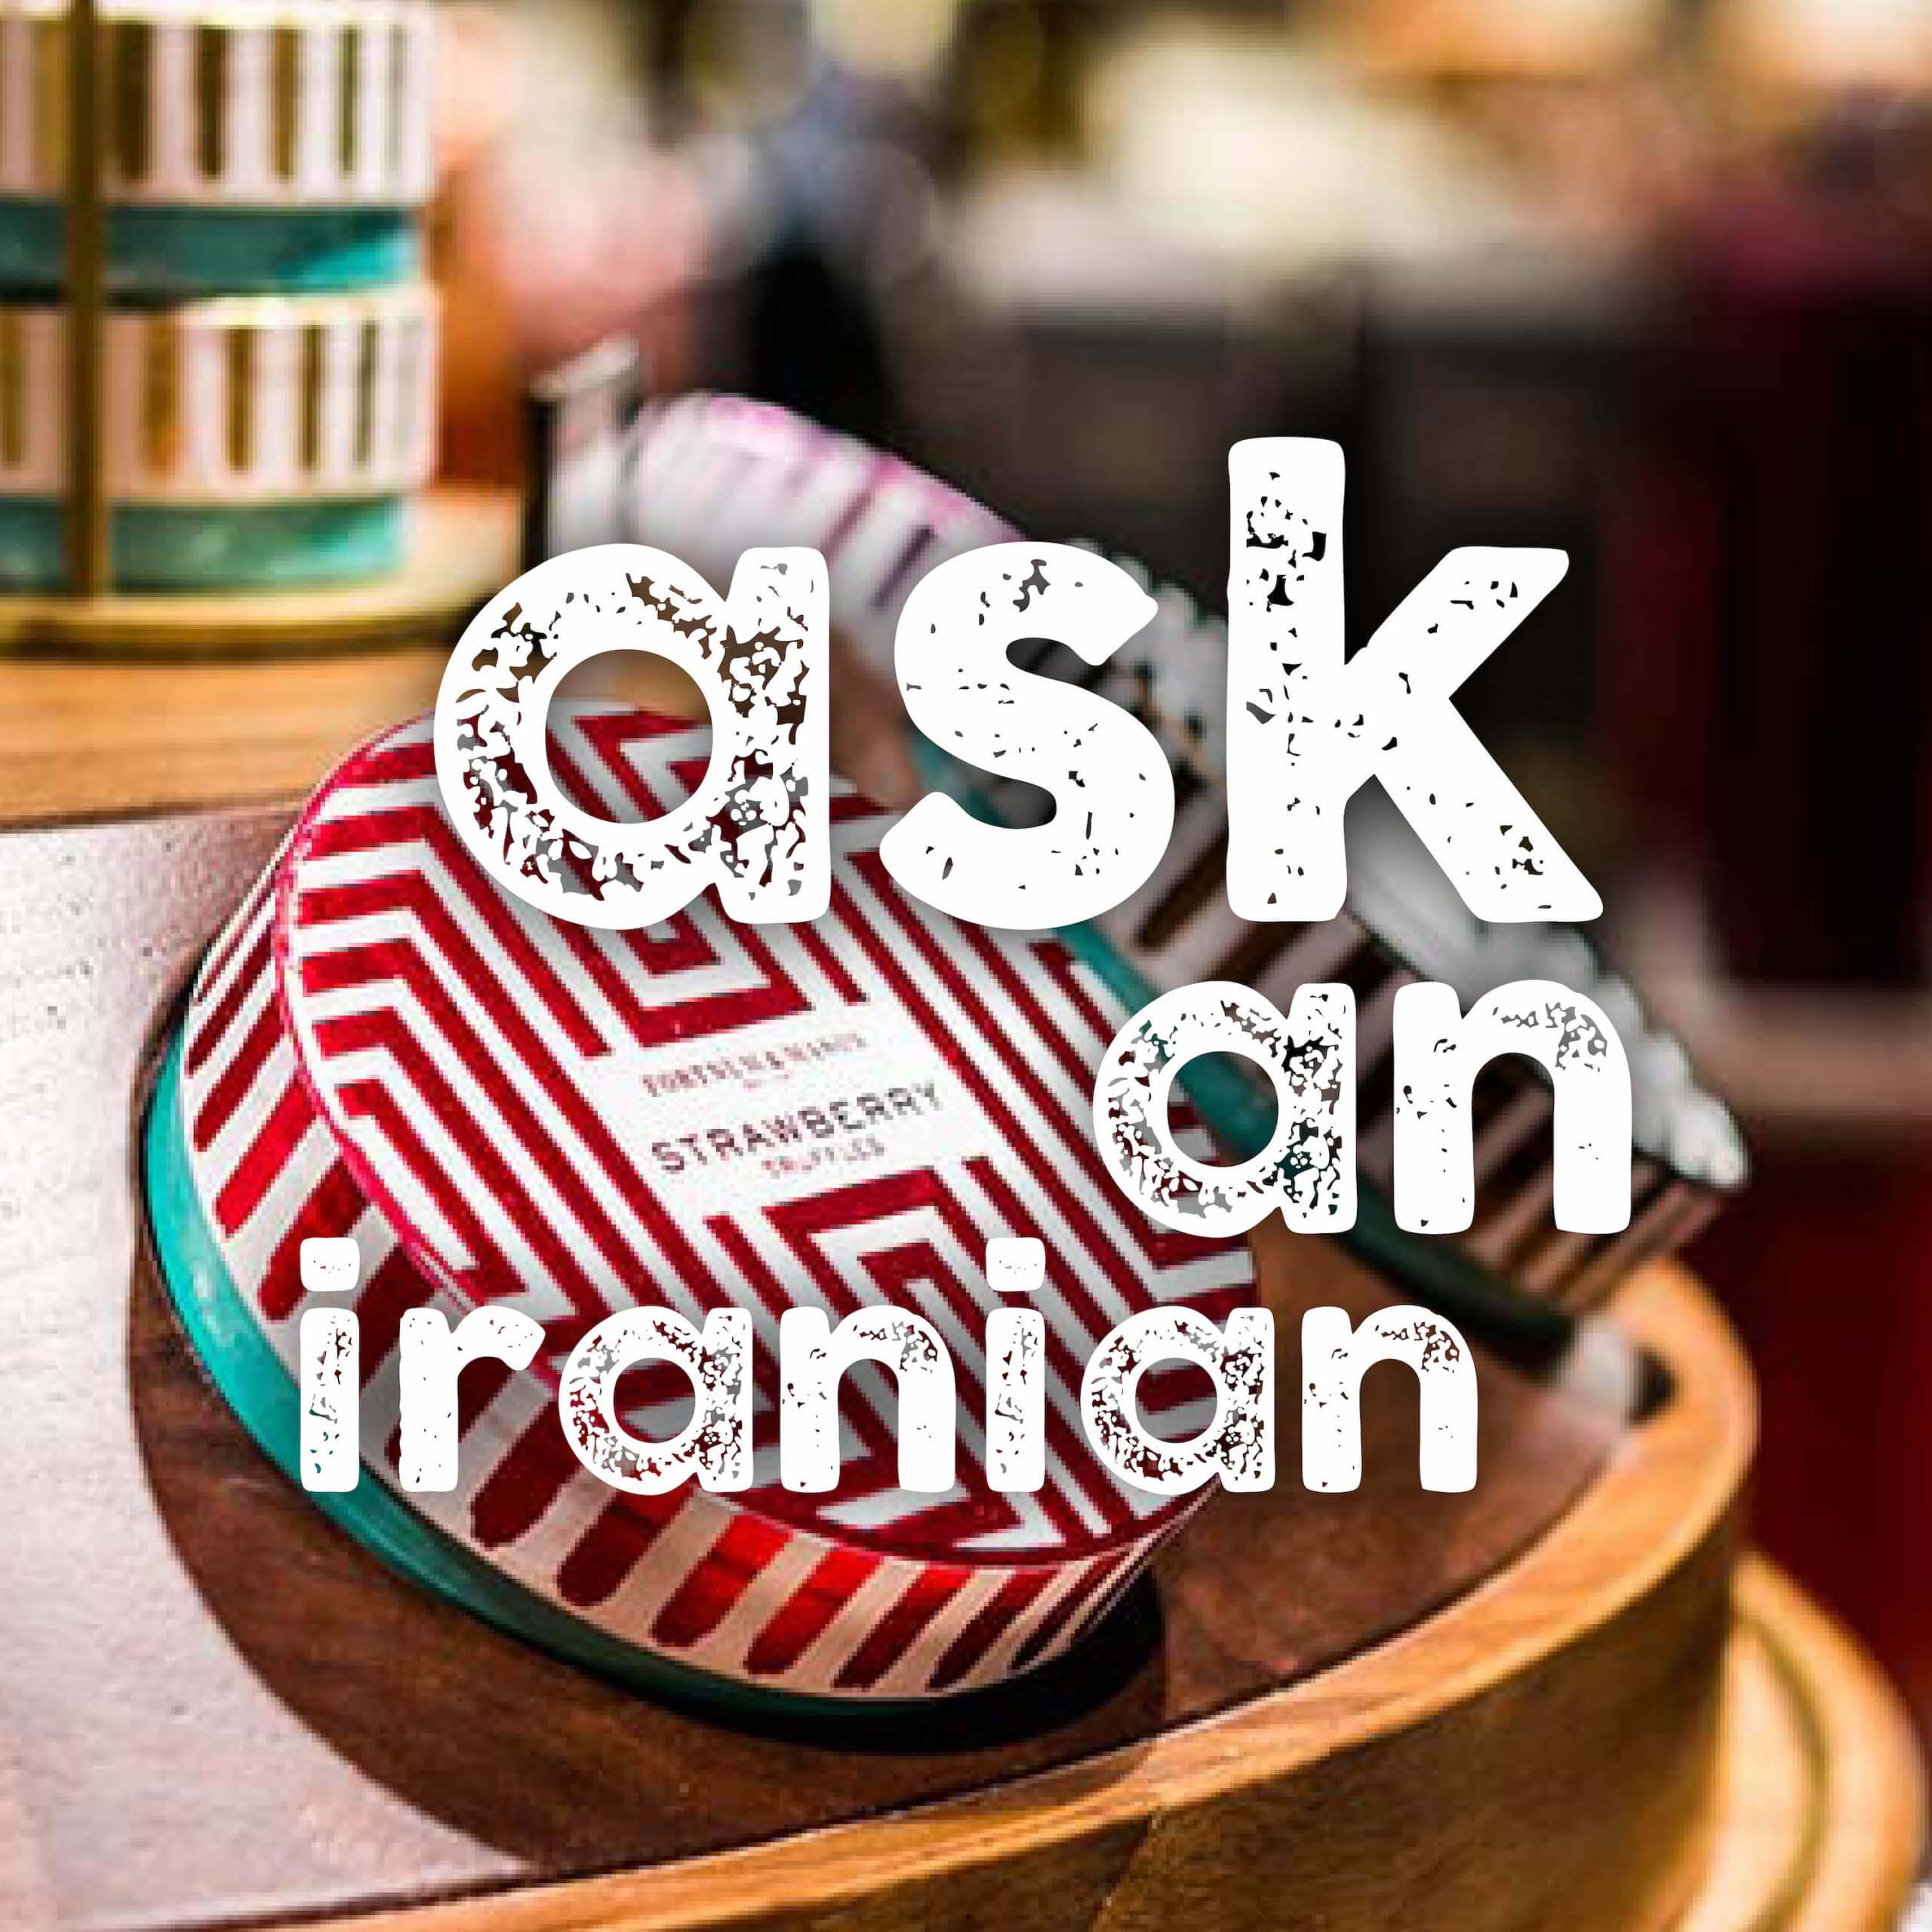 What souvenirs should I bring for my Iranian friends?